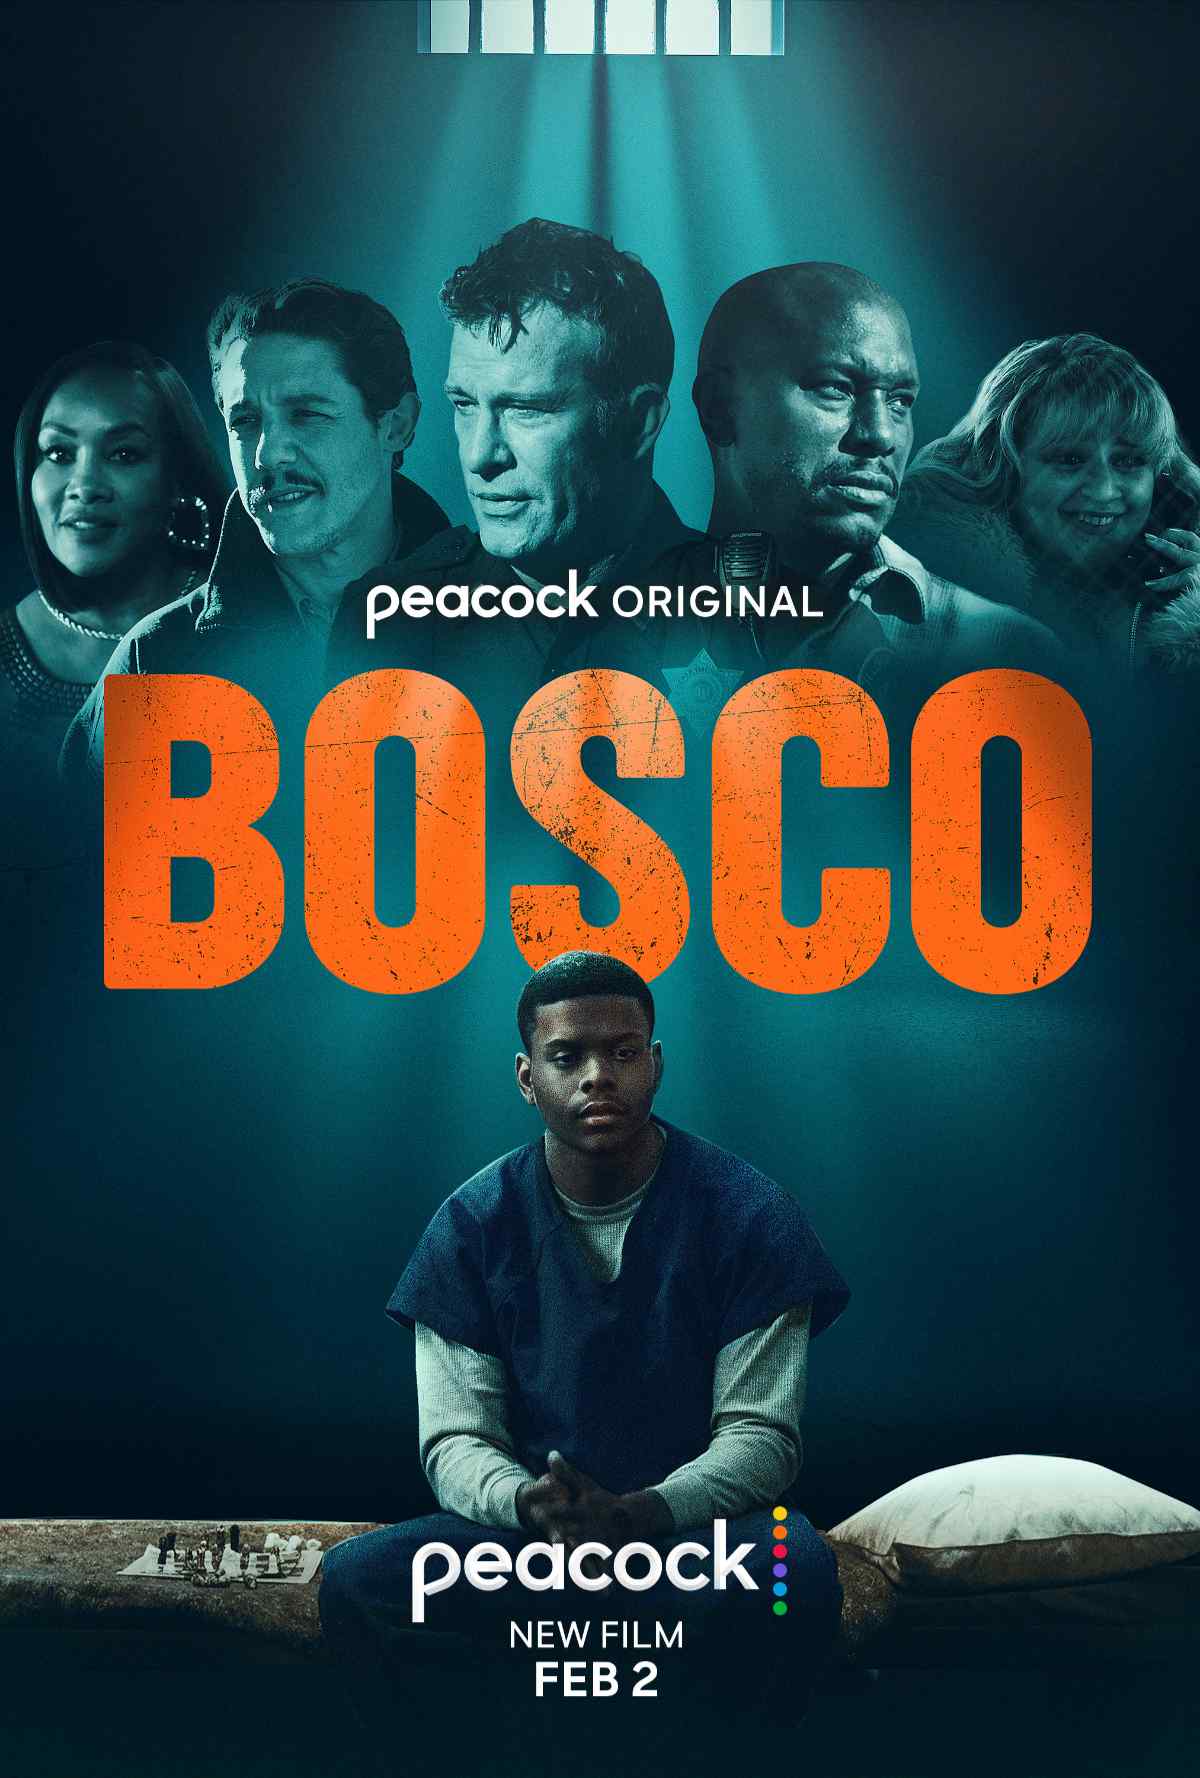 Bosco First Look Revealed by Peacock